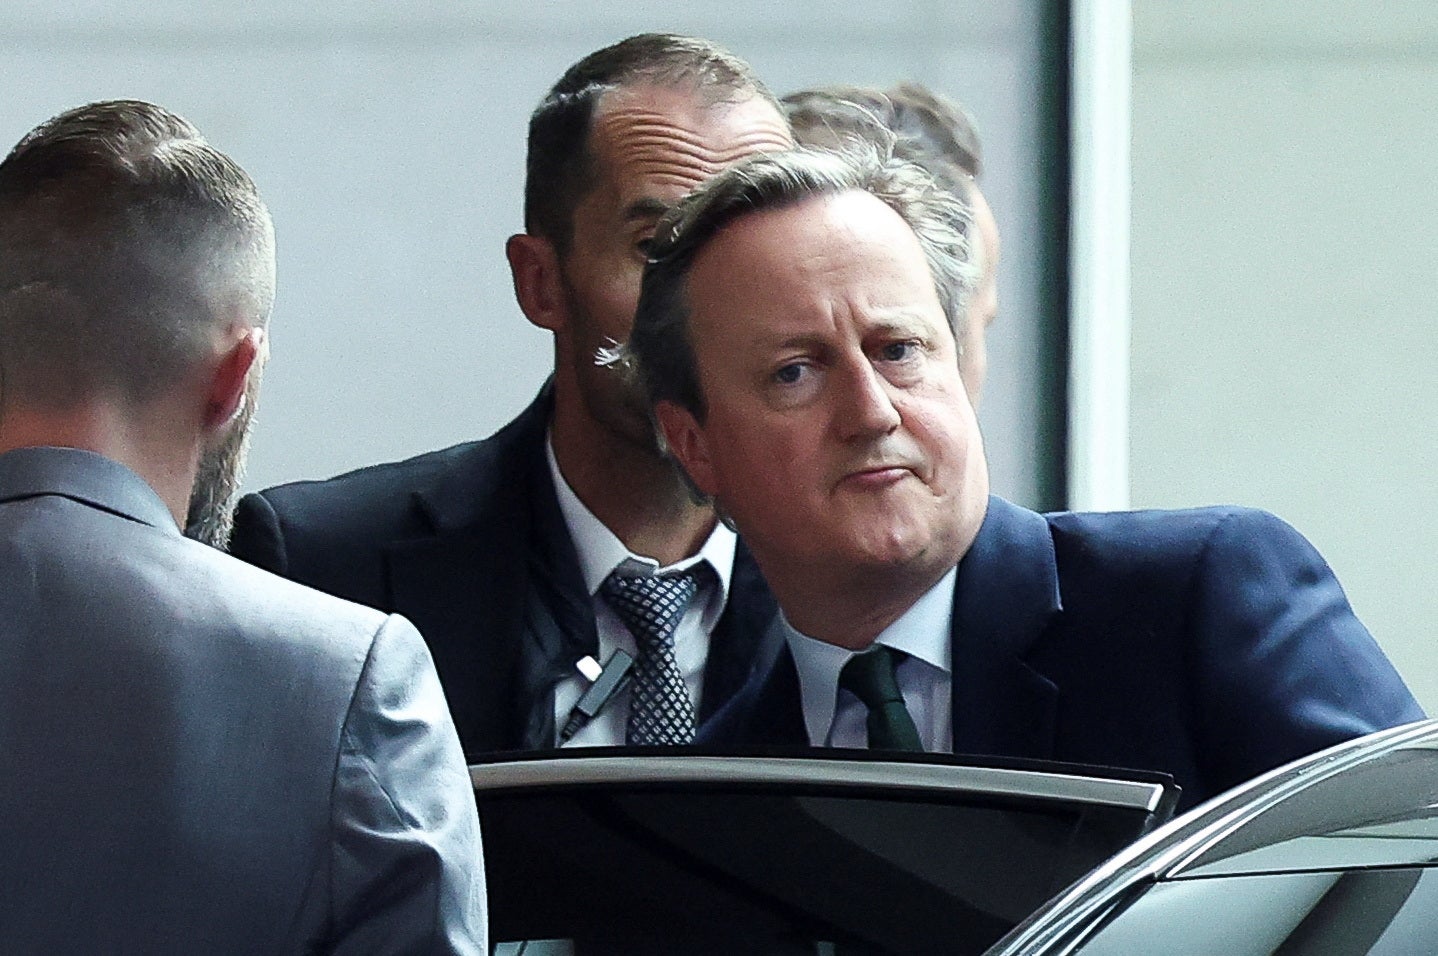 Cameron is said to support the deal